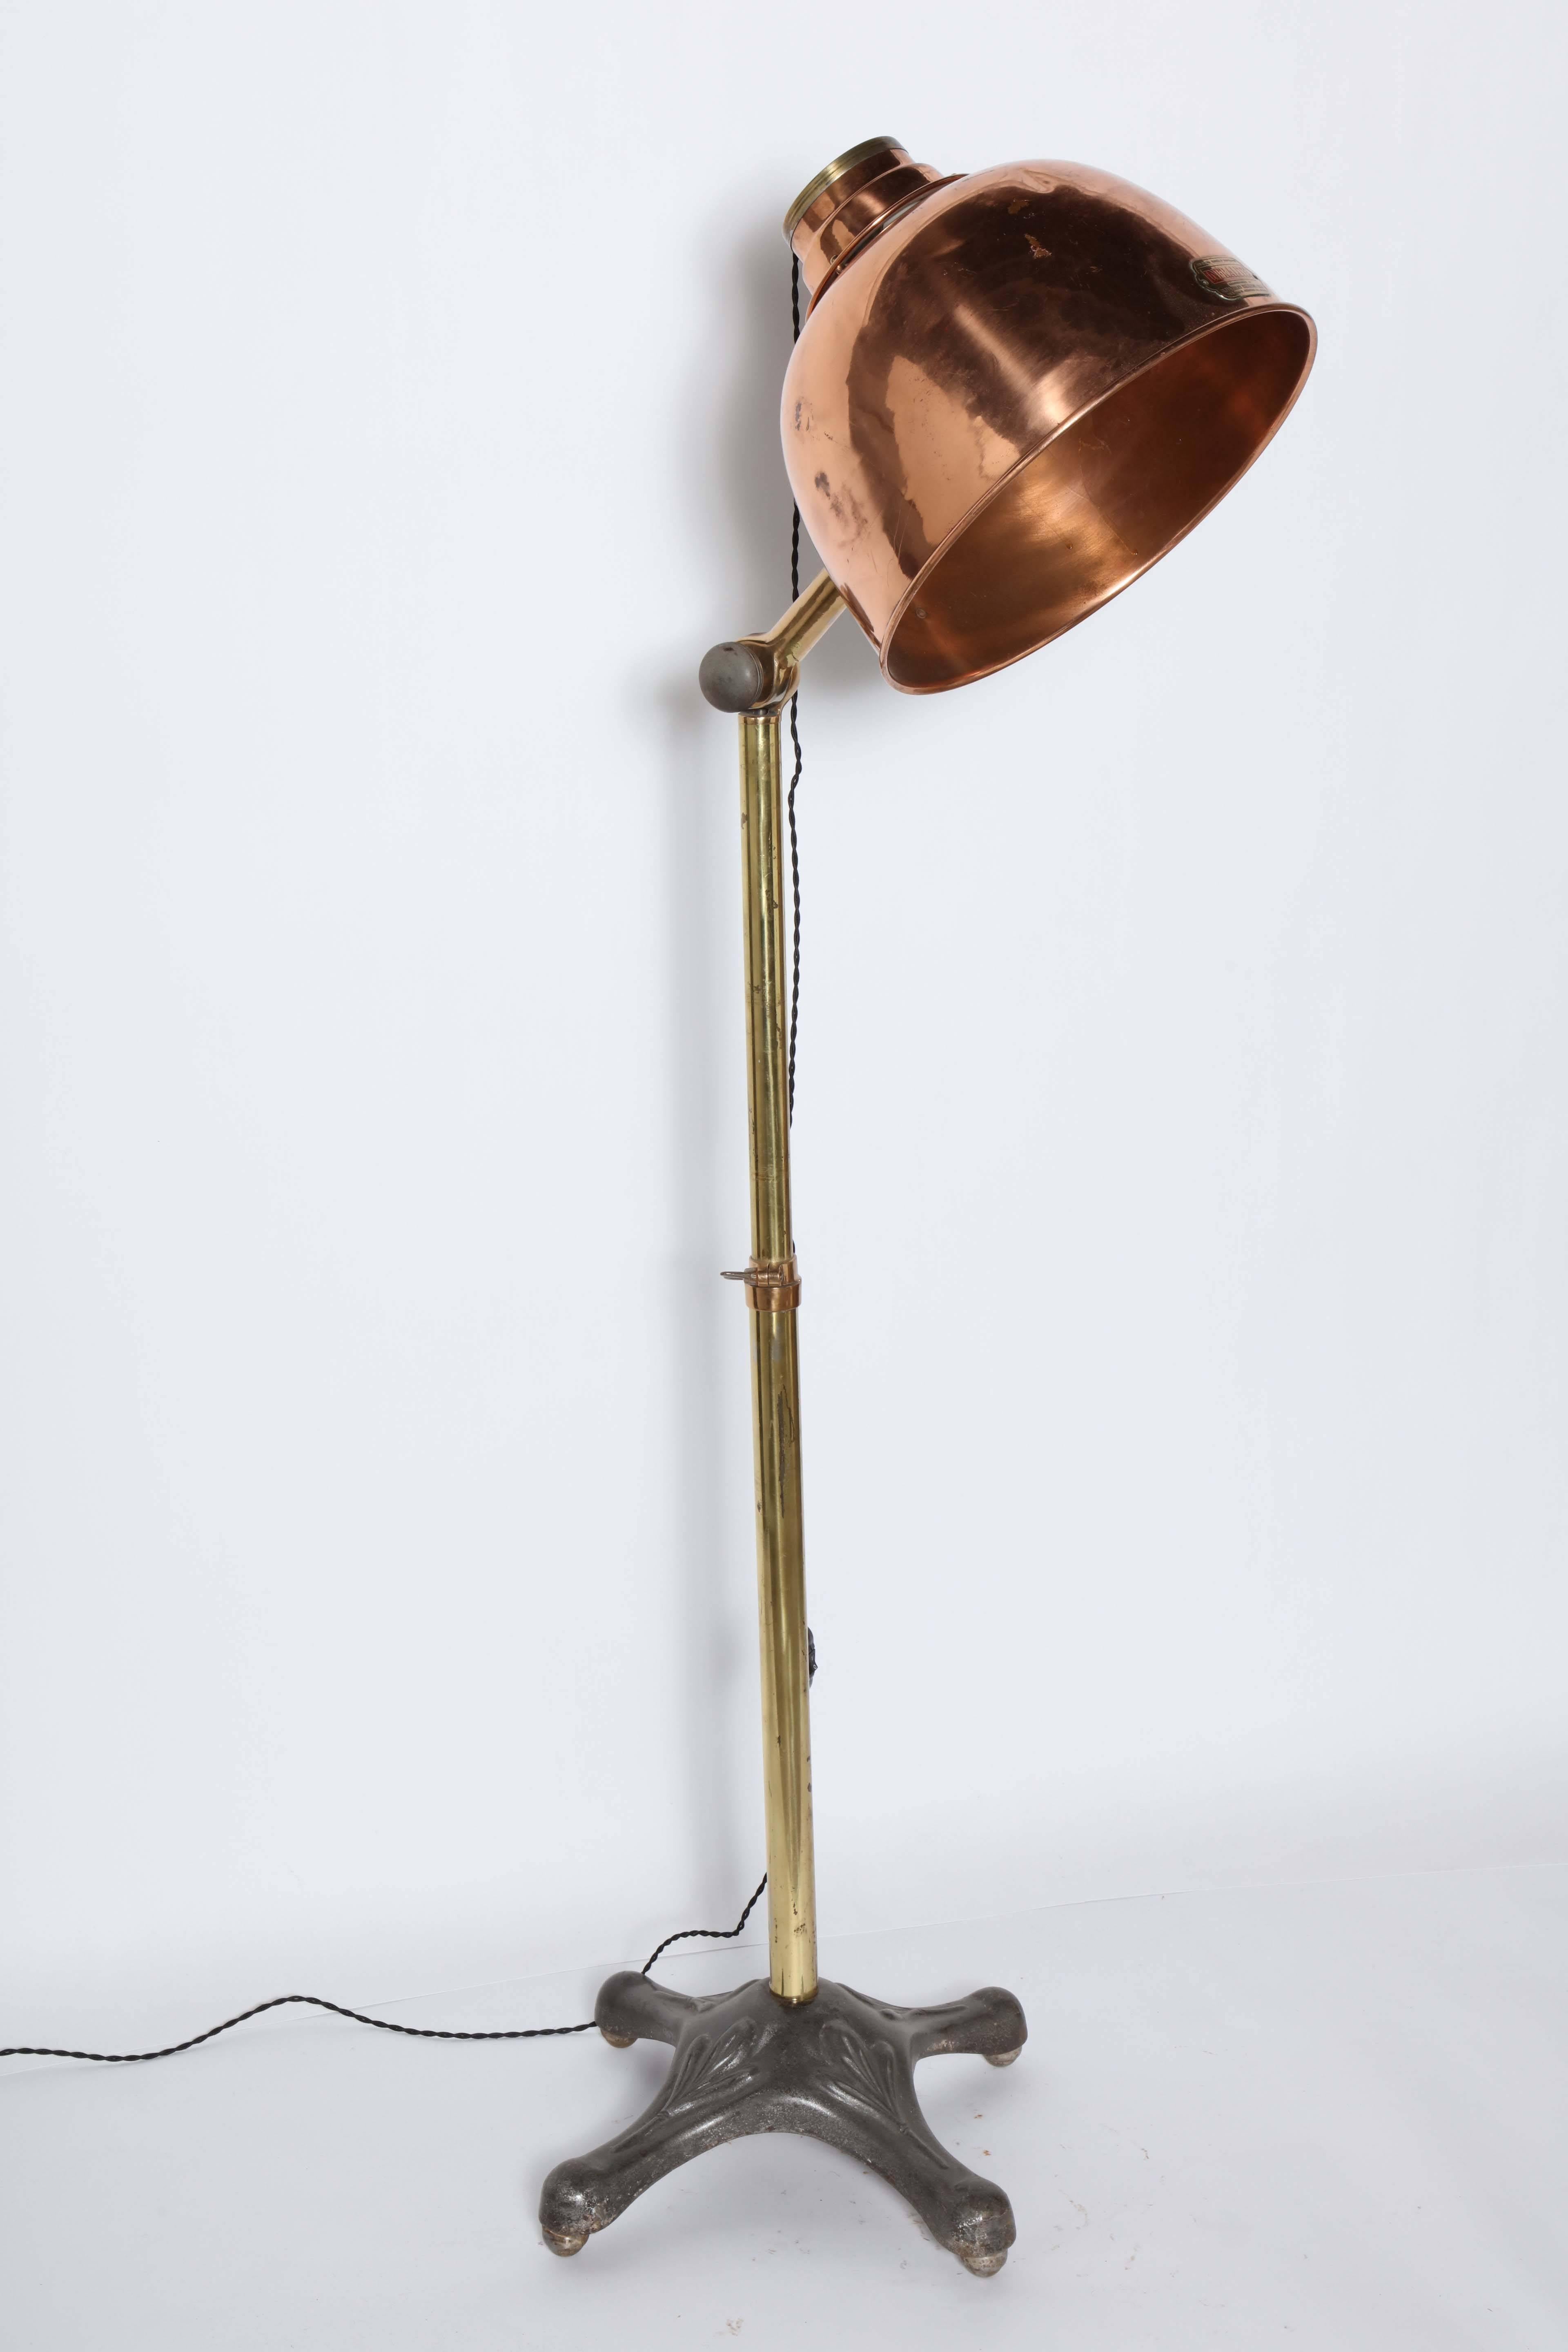 American Substantial Infralite Steel & Brass Floor Lamp with Large Copper Shade, C. 1910